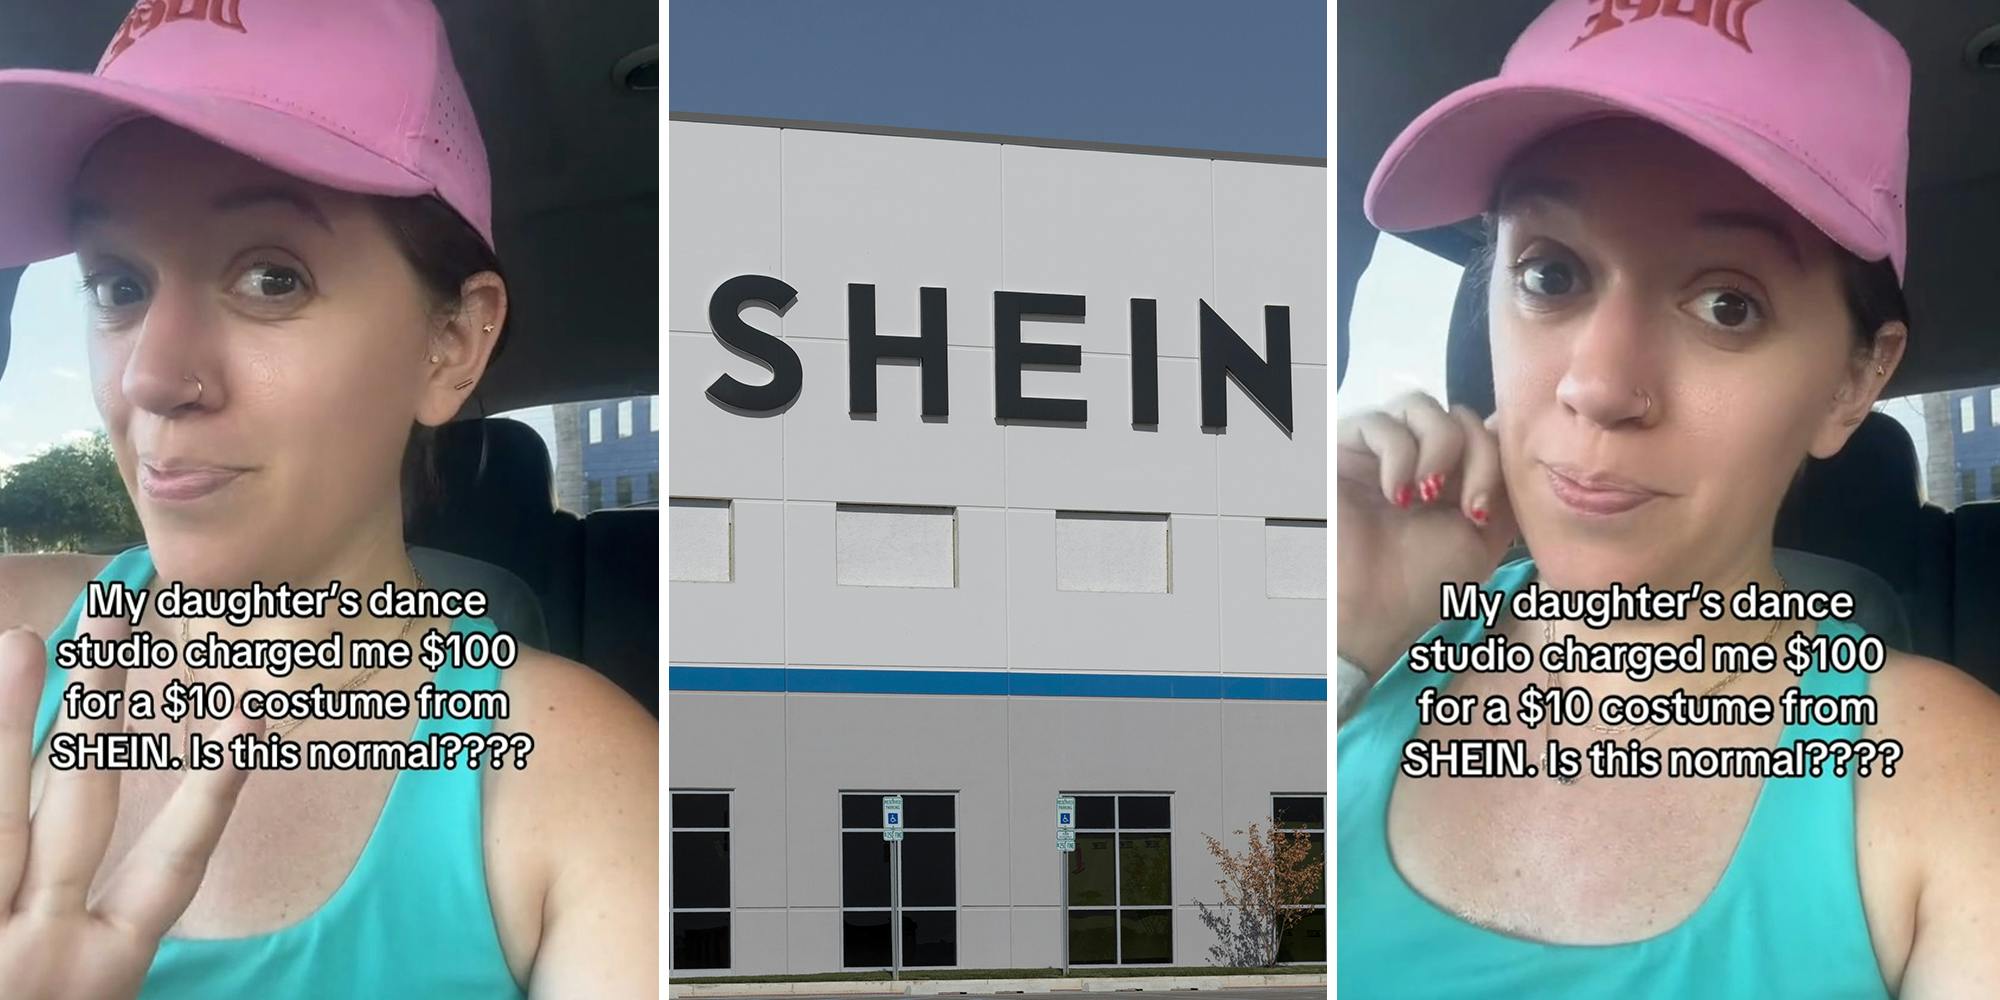 Mom says dance studio charged her $100 for daughter’s costume. Then she found out it came from Shein